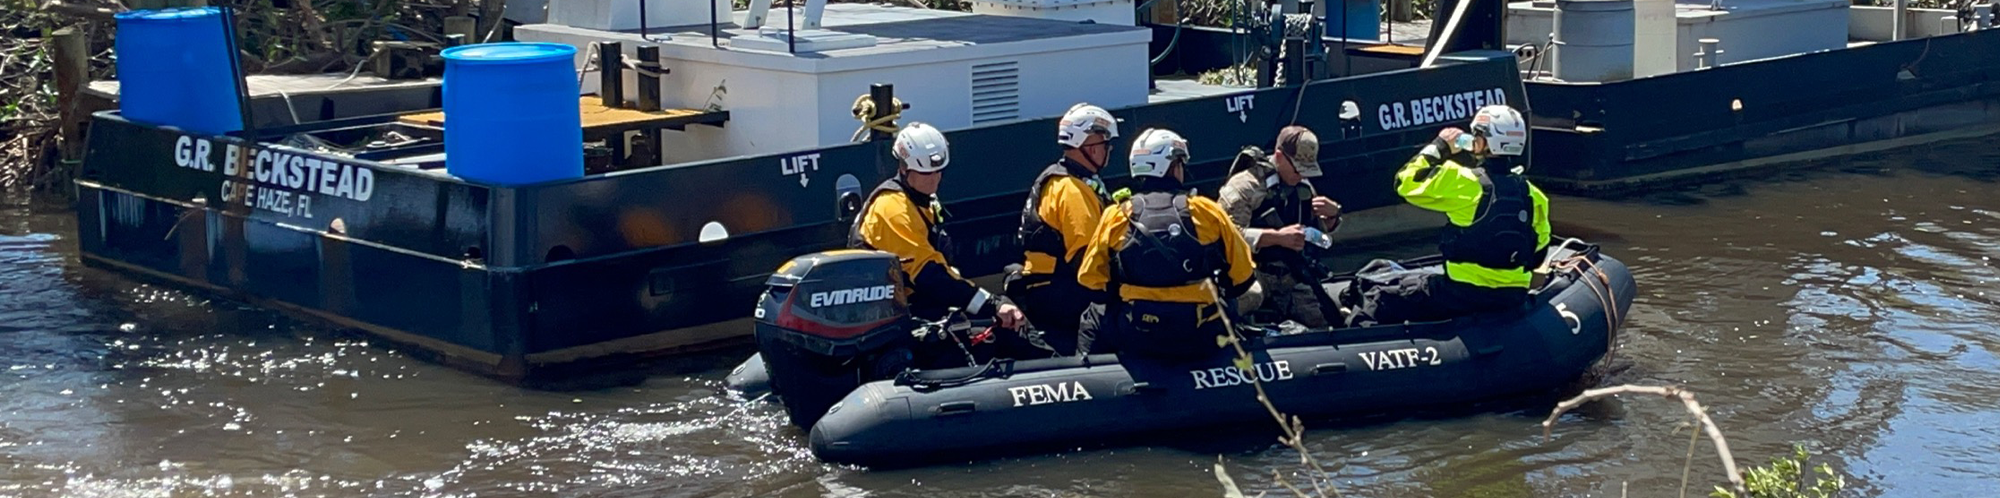 FEMA personnel are in a boat doing rescue operations